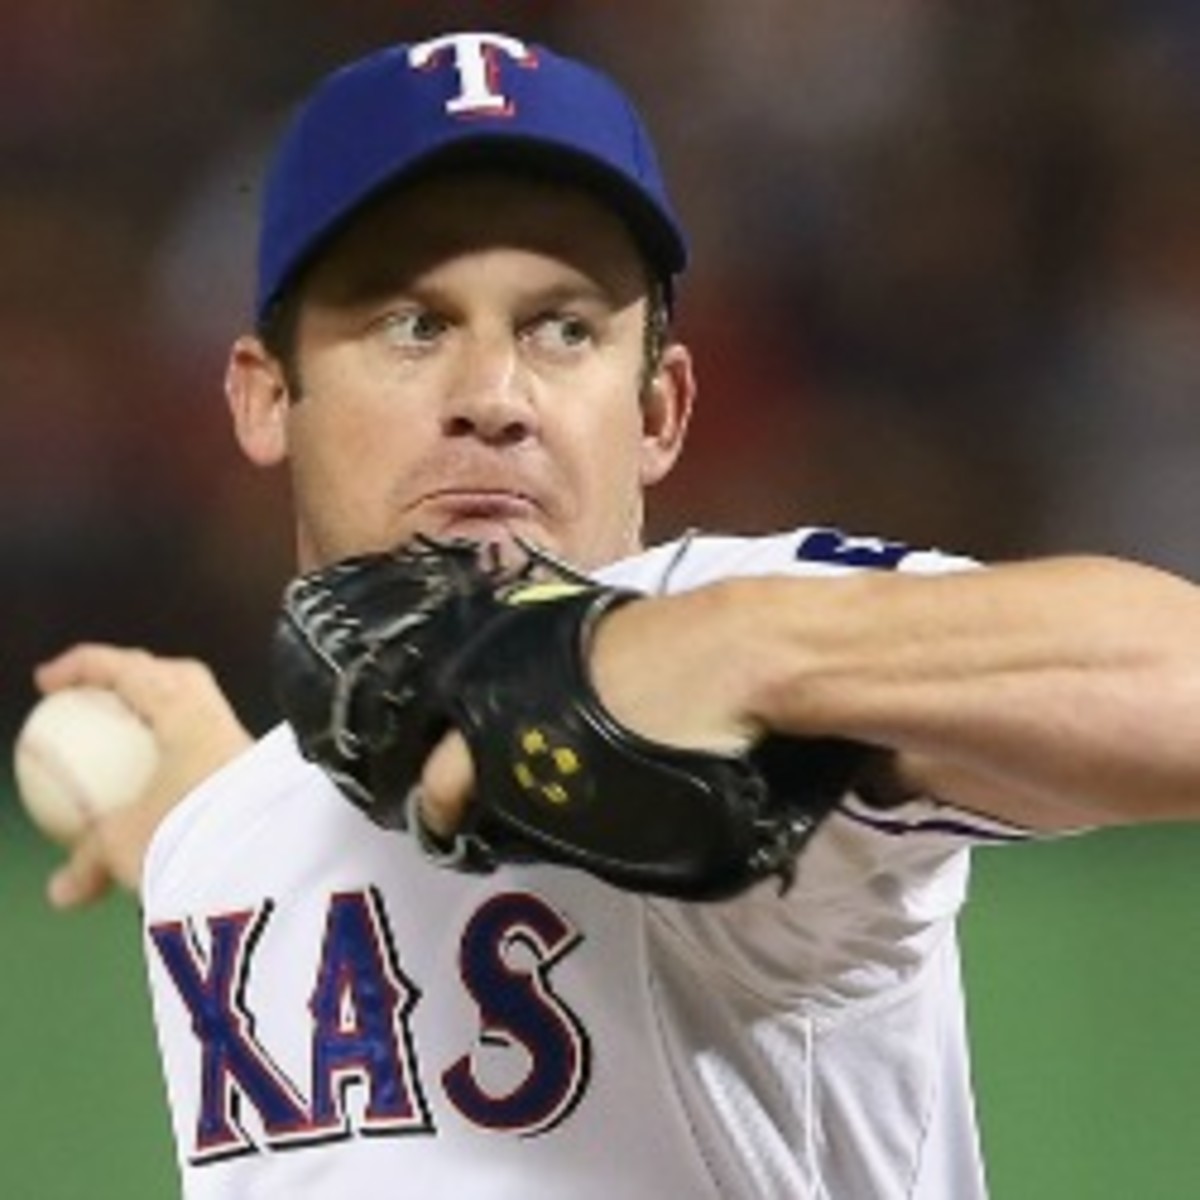 Pitcher Roy Oswalt, who is 11th among active players with 163 career wins, is reportedly considering retirement. (Ronald Martinez/Getty Images)